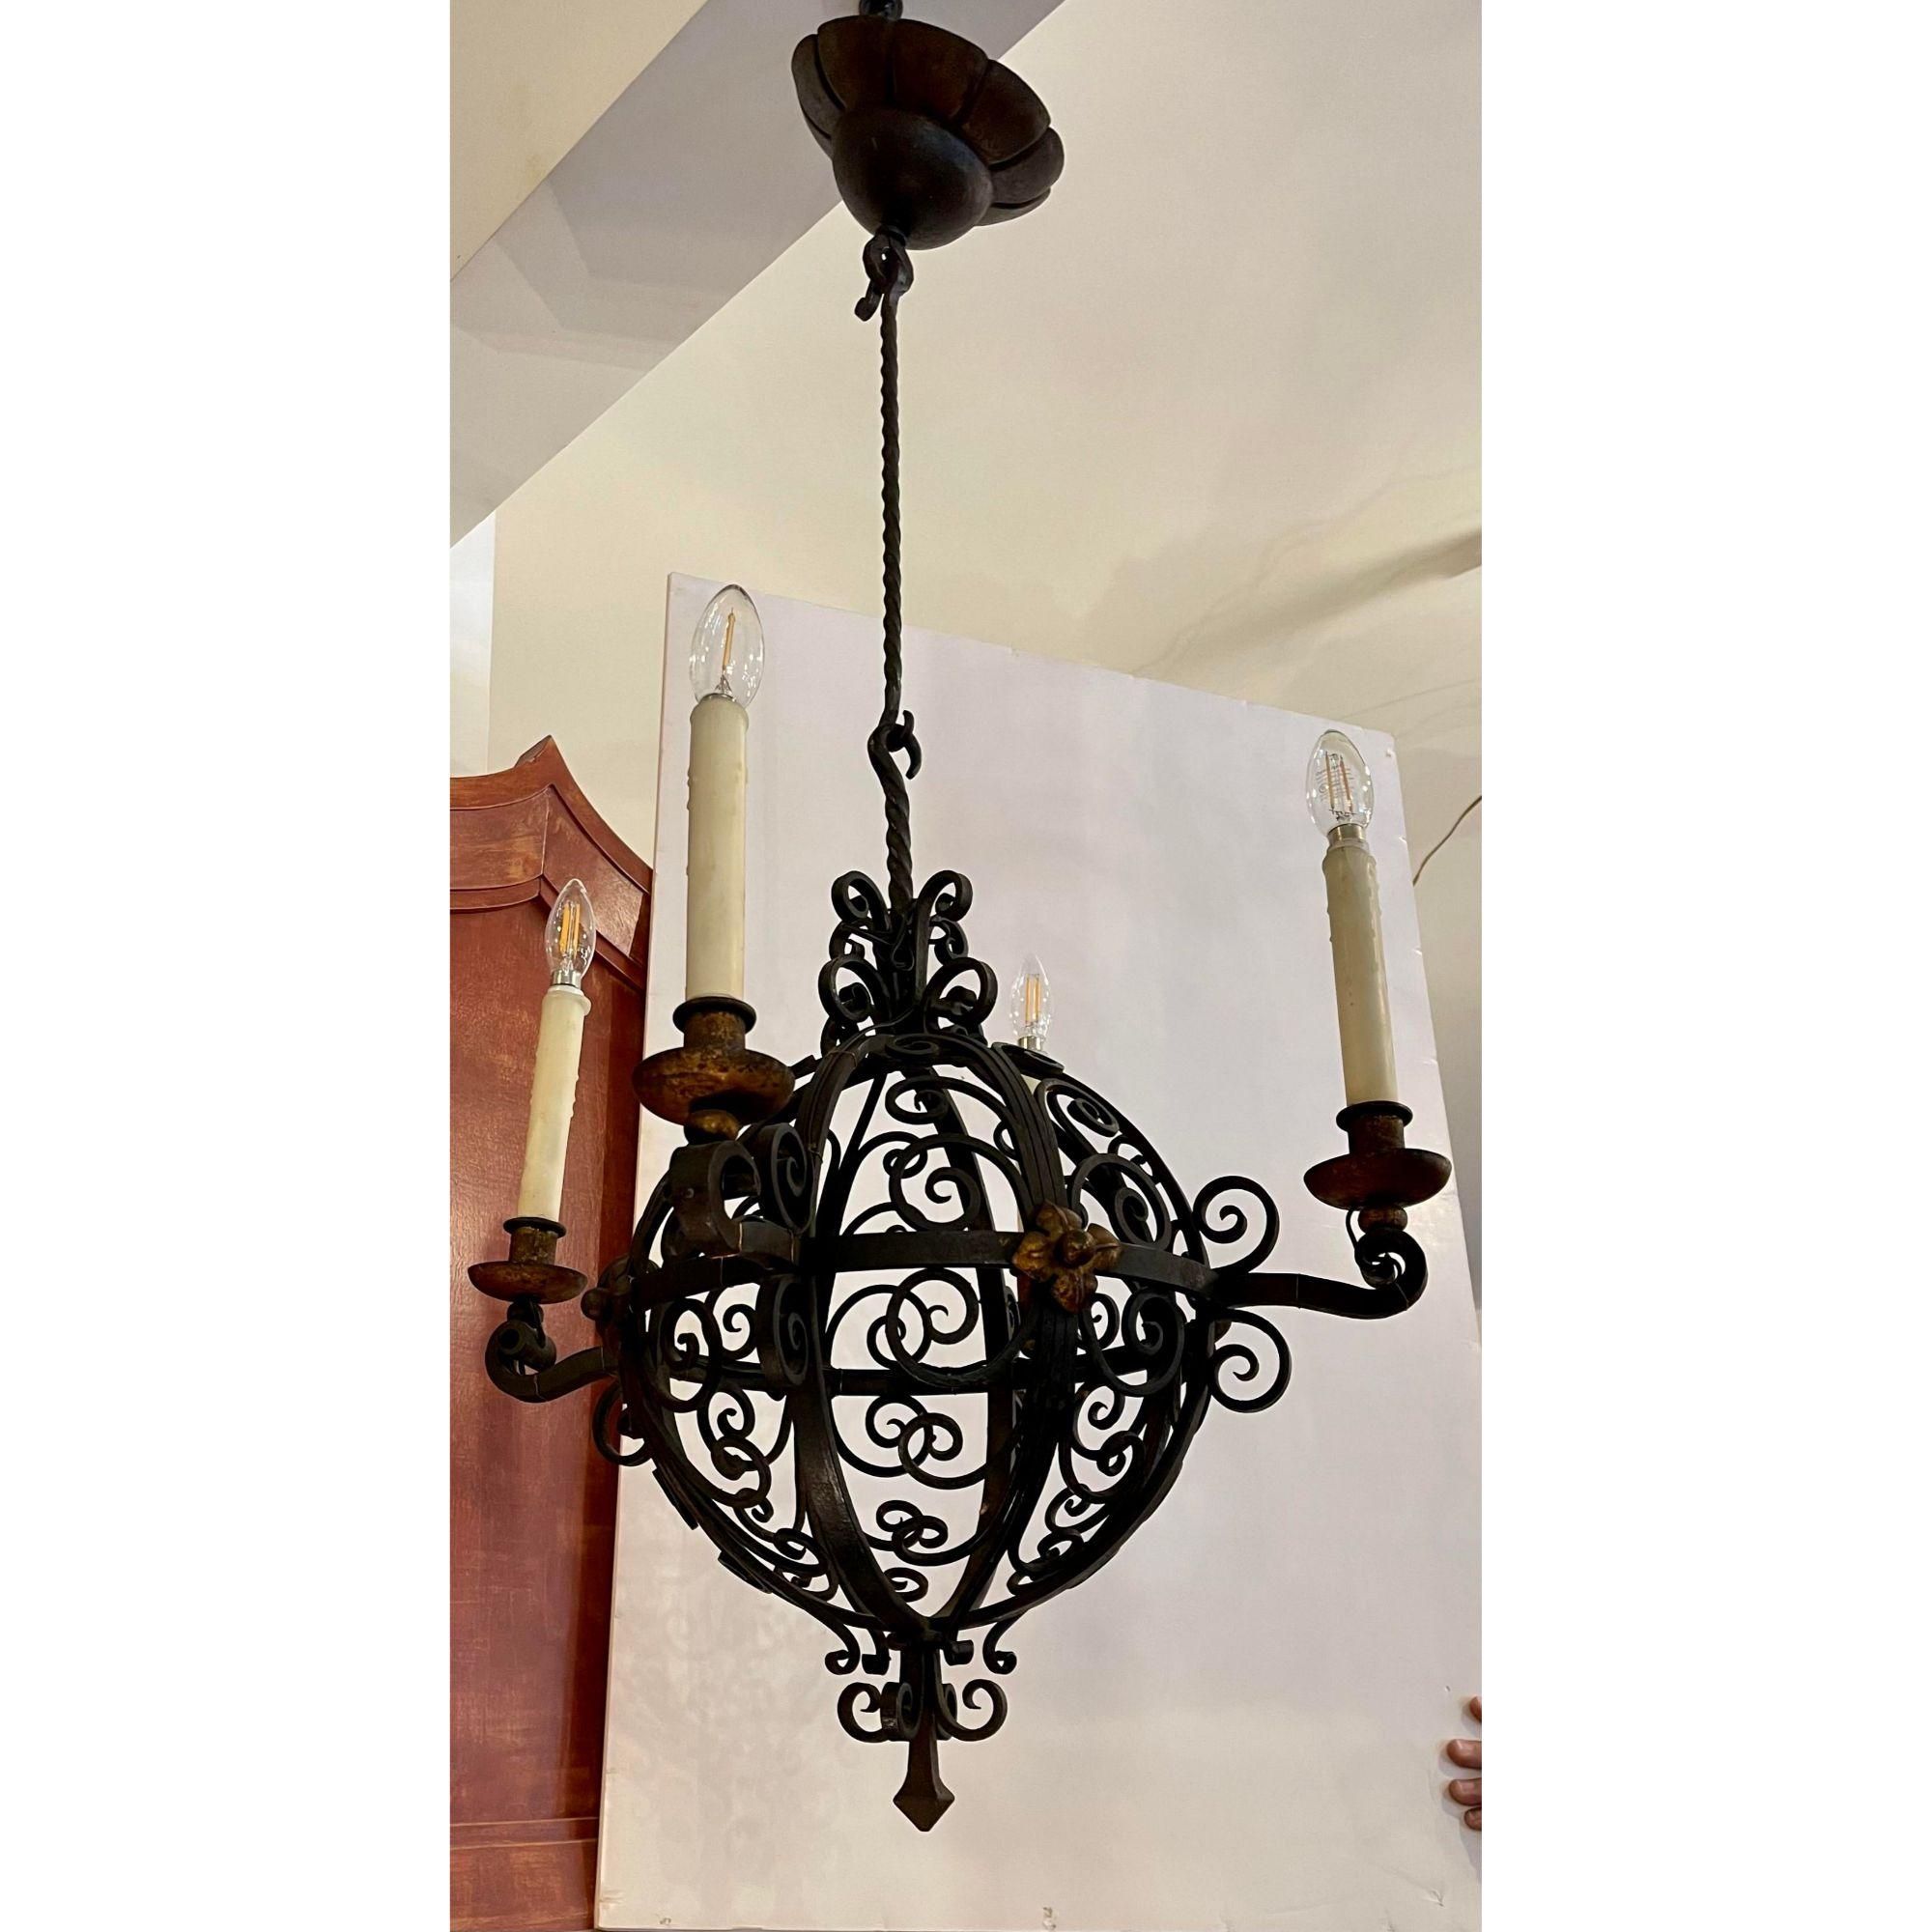 Antique Spanish Colonial Wrought Iron Chandelier

Additional information: 
Materials: Iron, Lights
Color: Black
Period: 1920s
Styles: Spanish Colonial
Power sources: Up to 120V (US Standard)Hardwired
Item Type: Vintage, Antique or